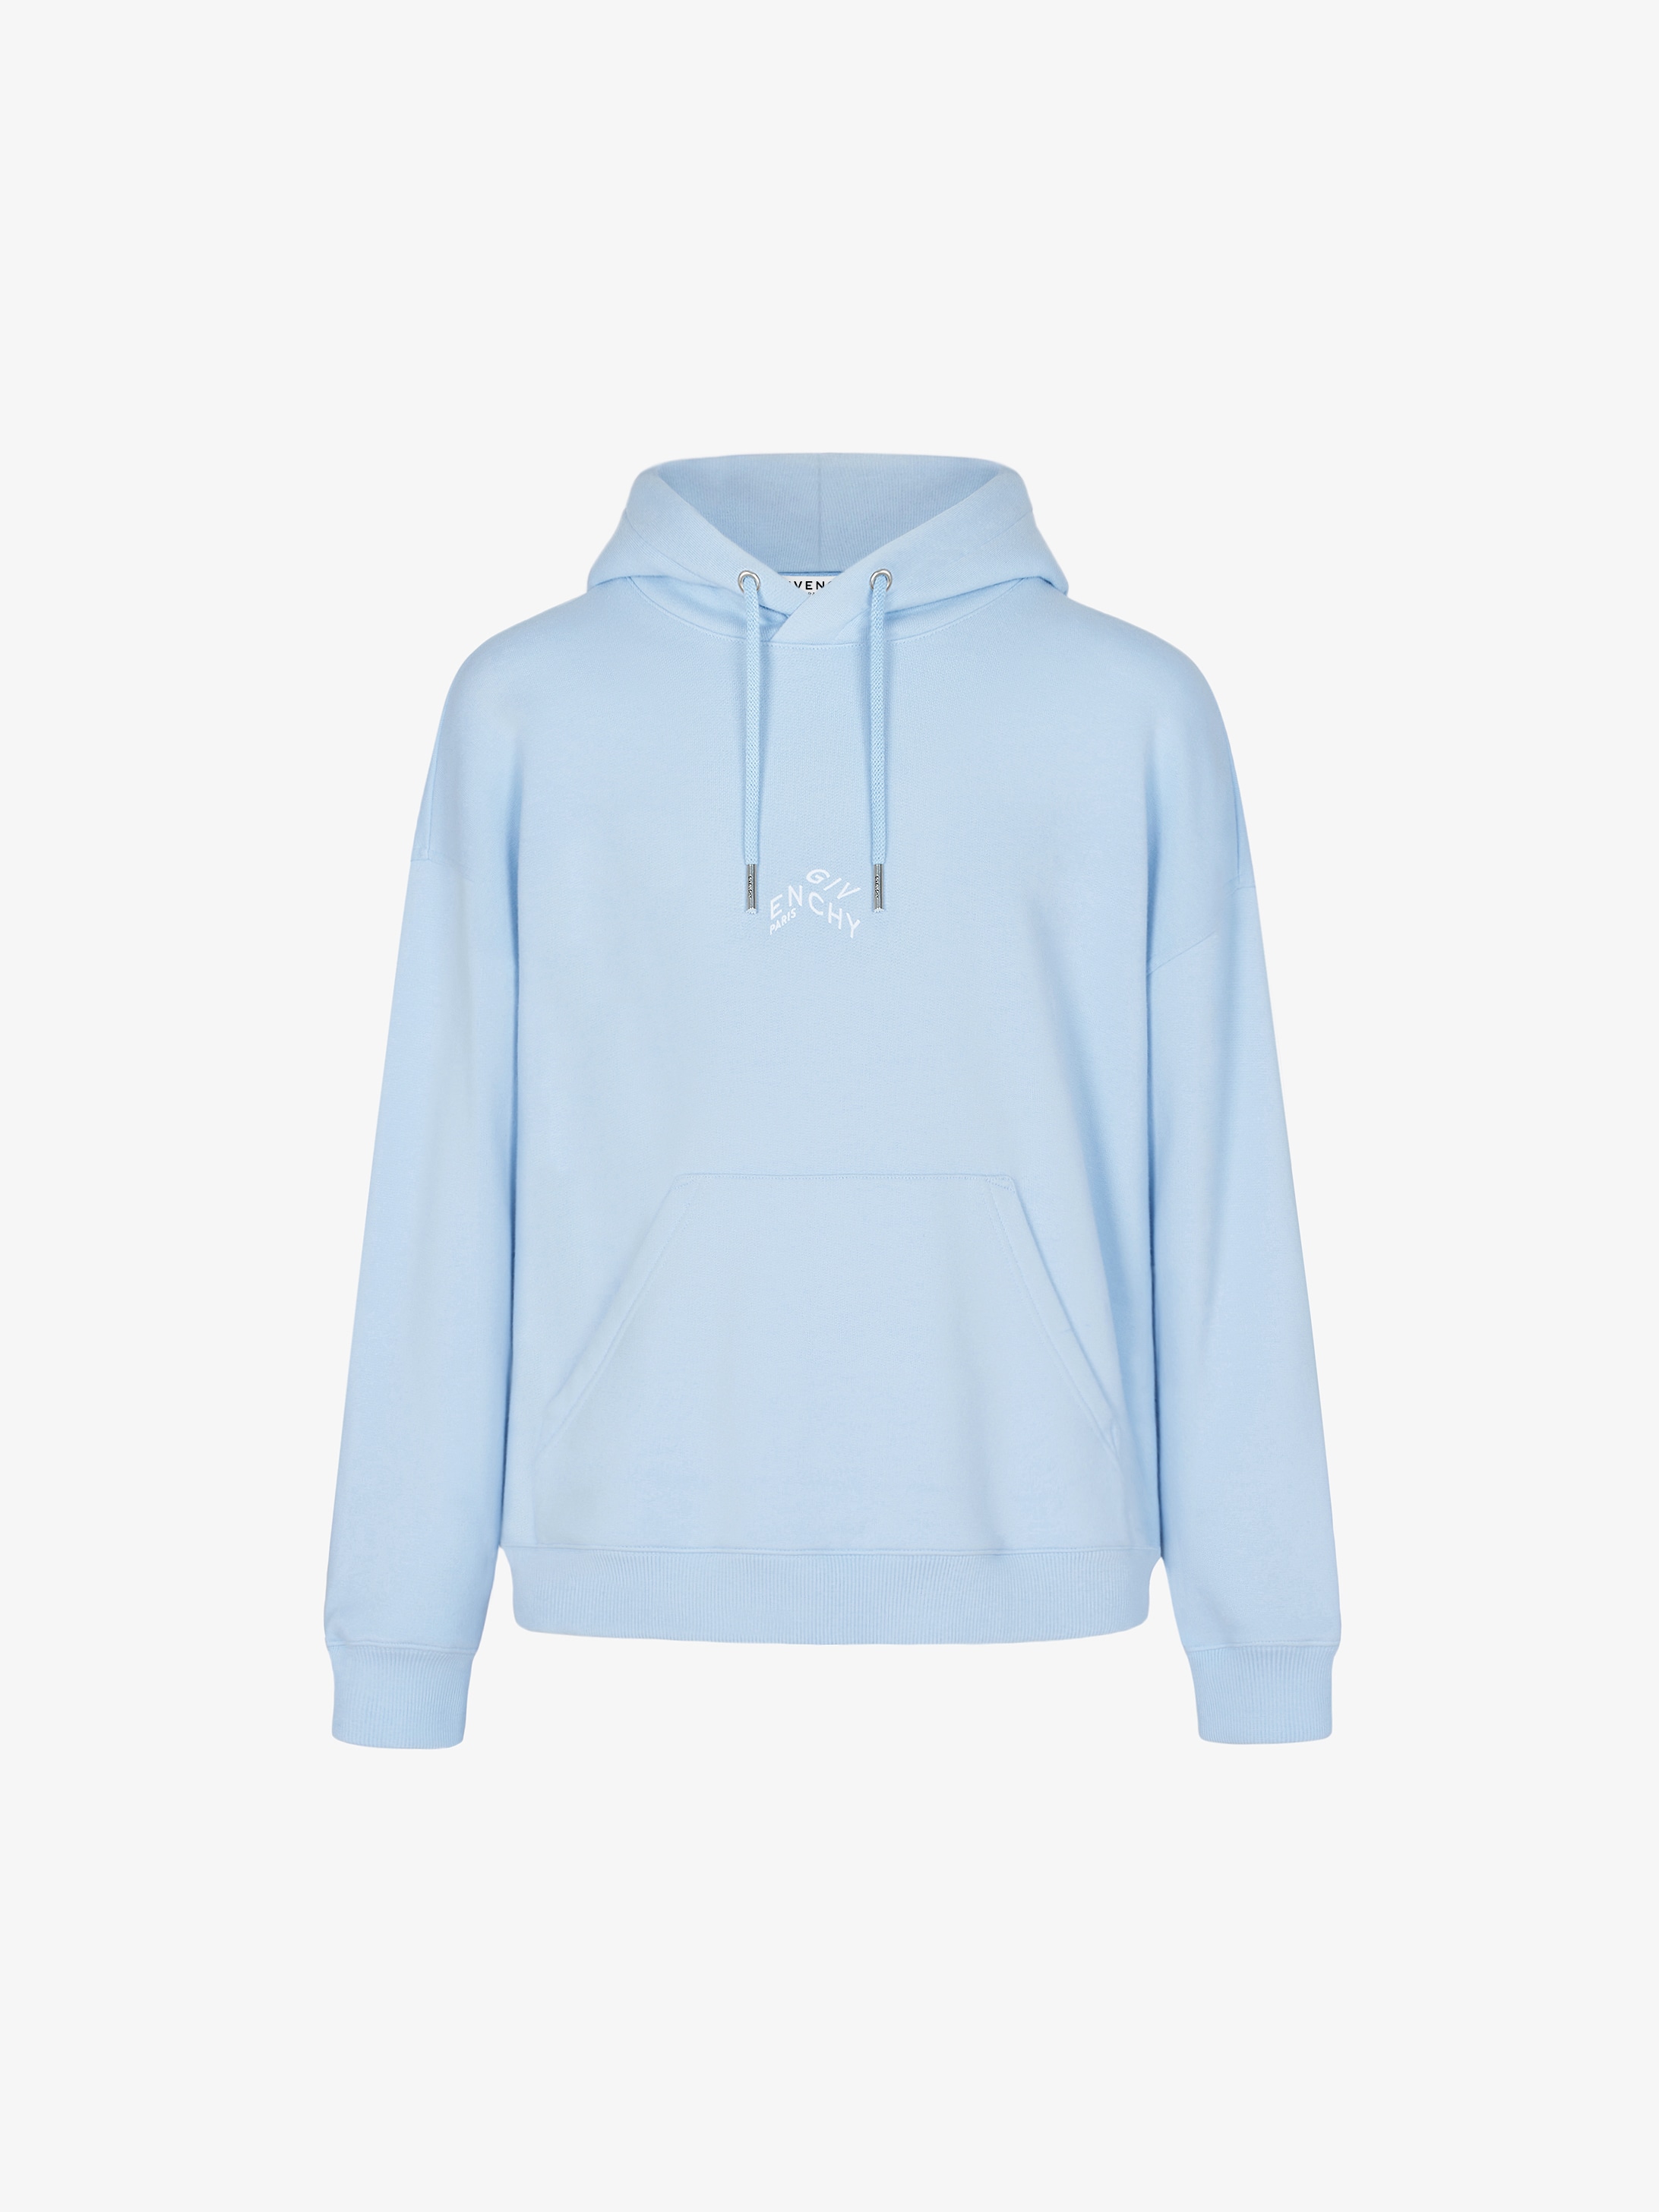 givenchy light blue hoodie